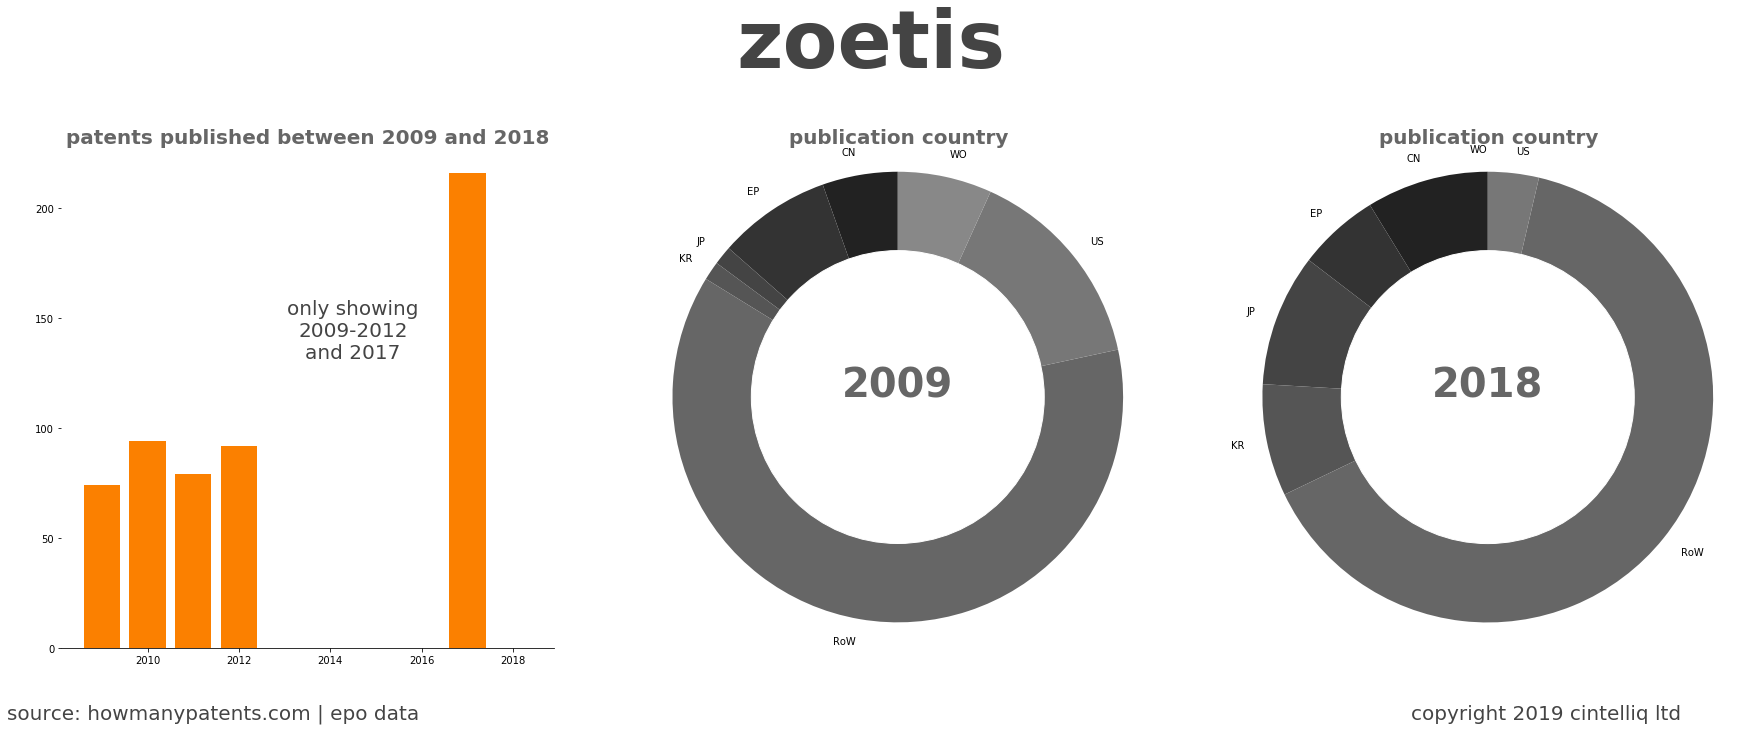 summary of patents for Zoetis